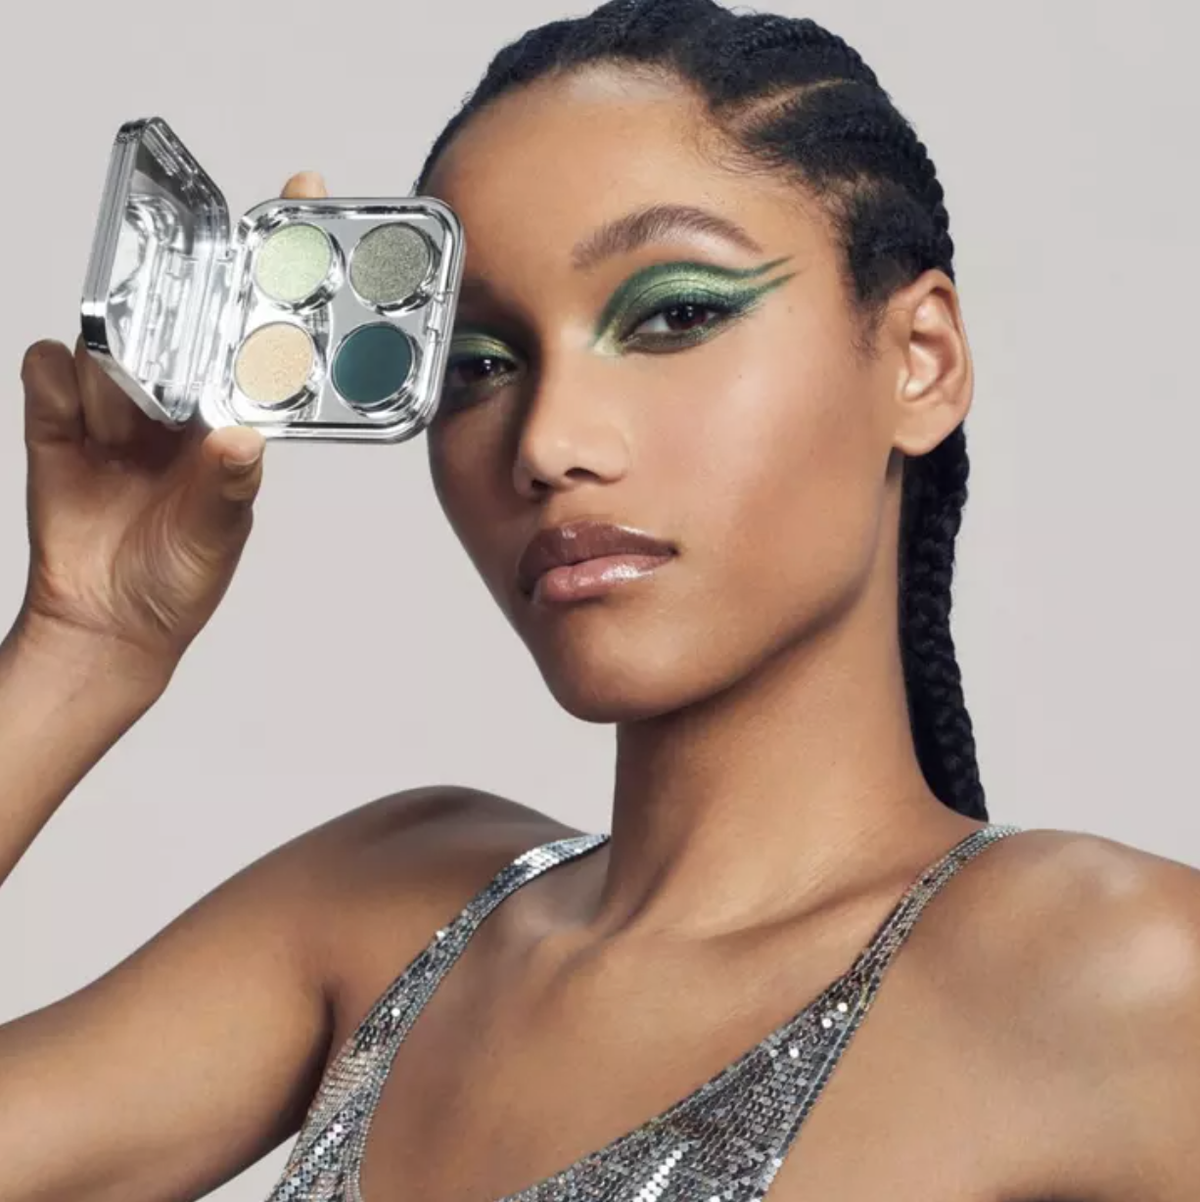 The 15 Best Makeup Kits of 2023